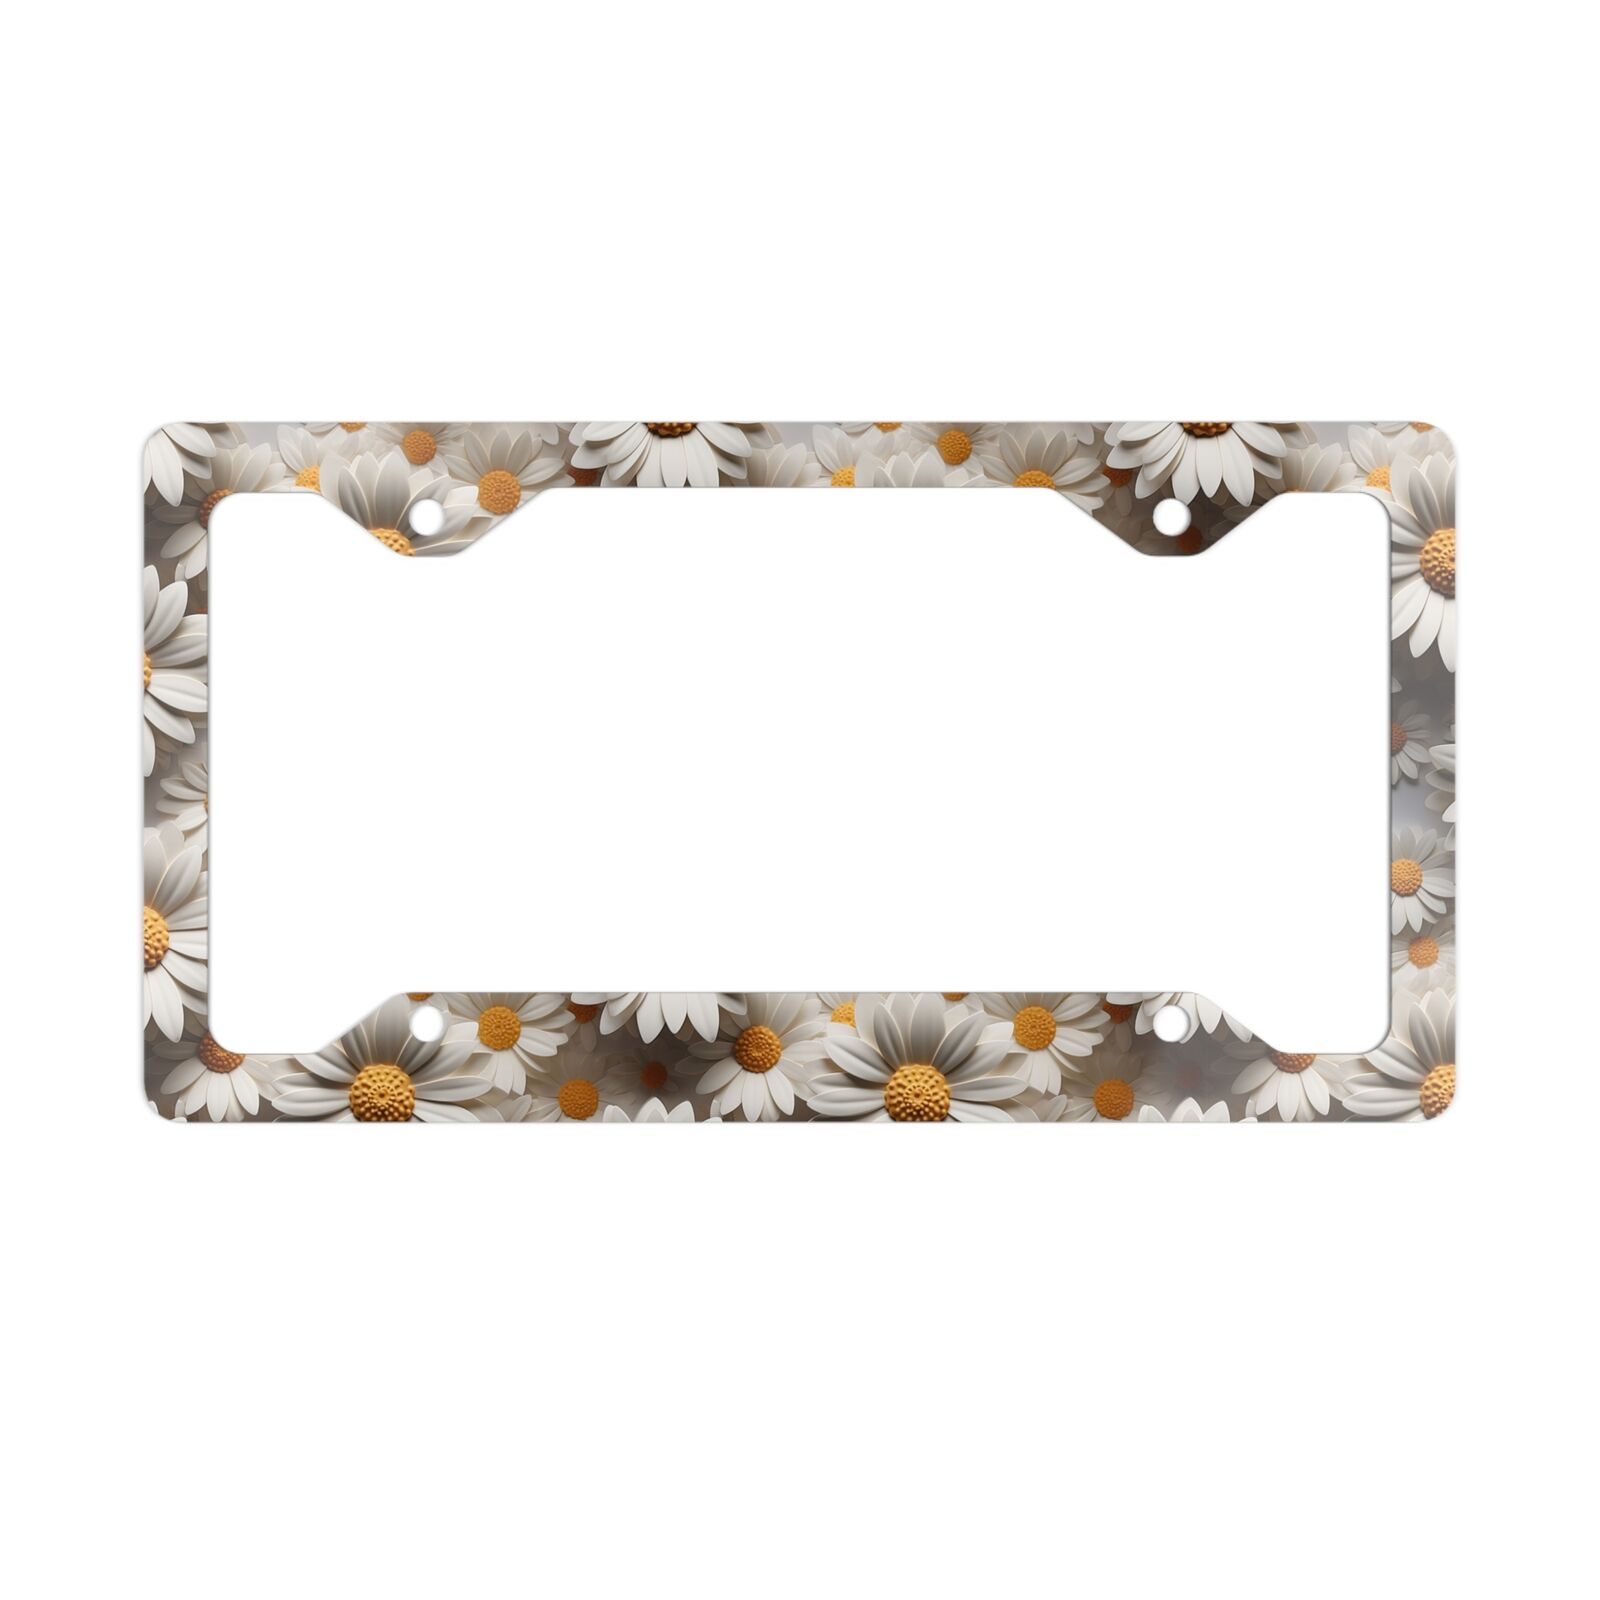 3D White Daisies Floral Flower Metal License Plate Frame